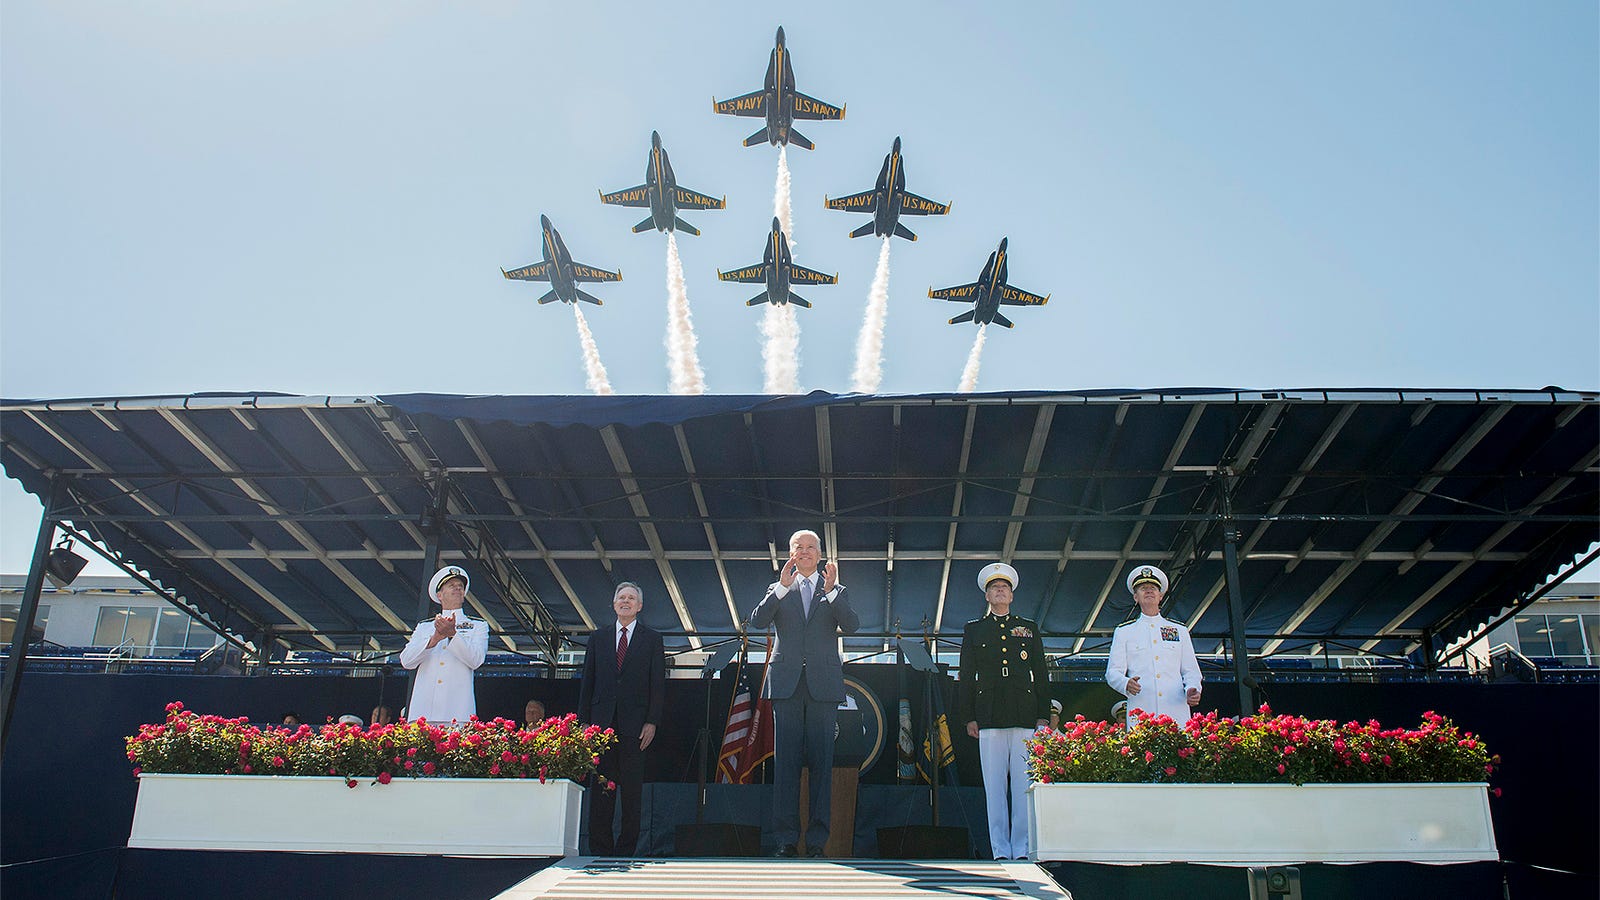 The Blue Angels Roar Over Graduation At The U.S. Naval Academy